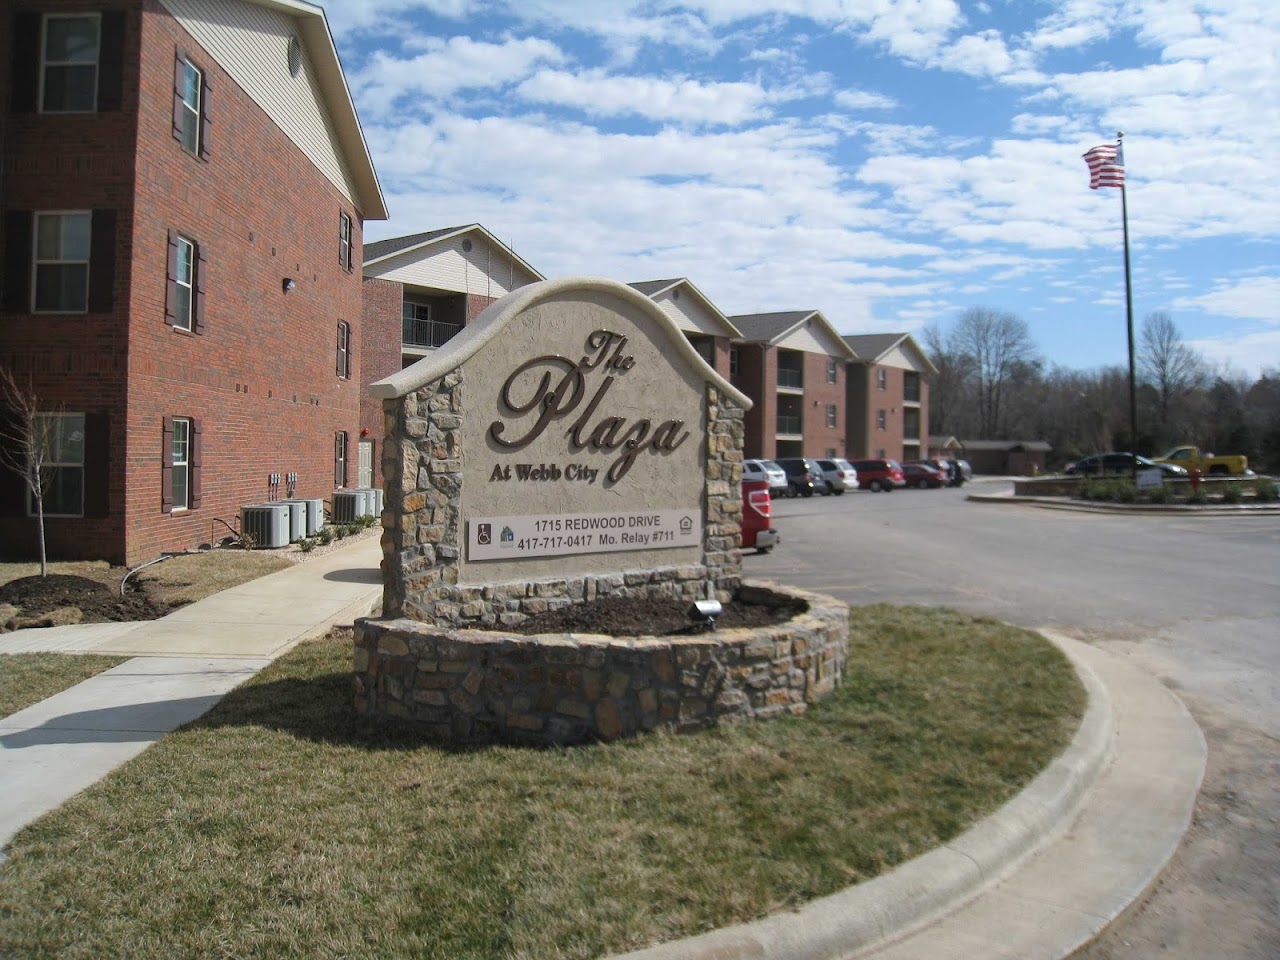 Photo of WEBB CITY CIRCLE. Affordable housing located at 1715 REDWOOD DR WEBB CITY, MO 64870